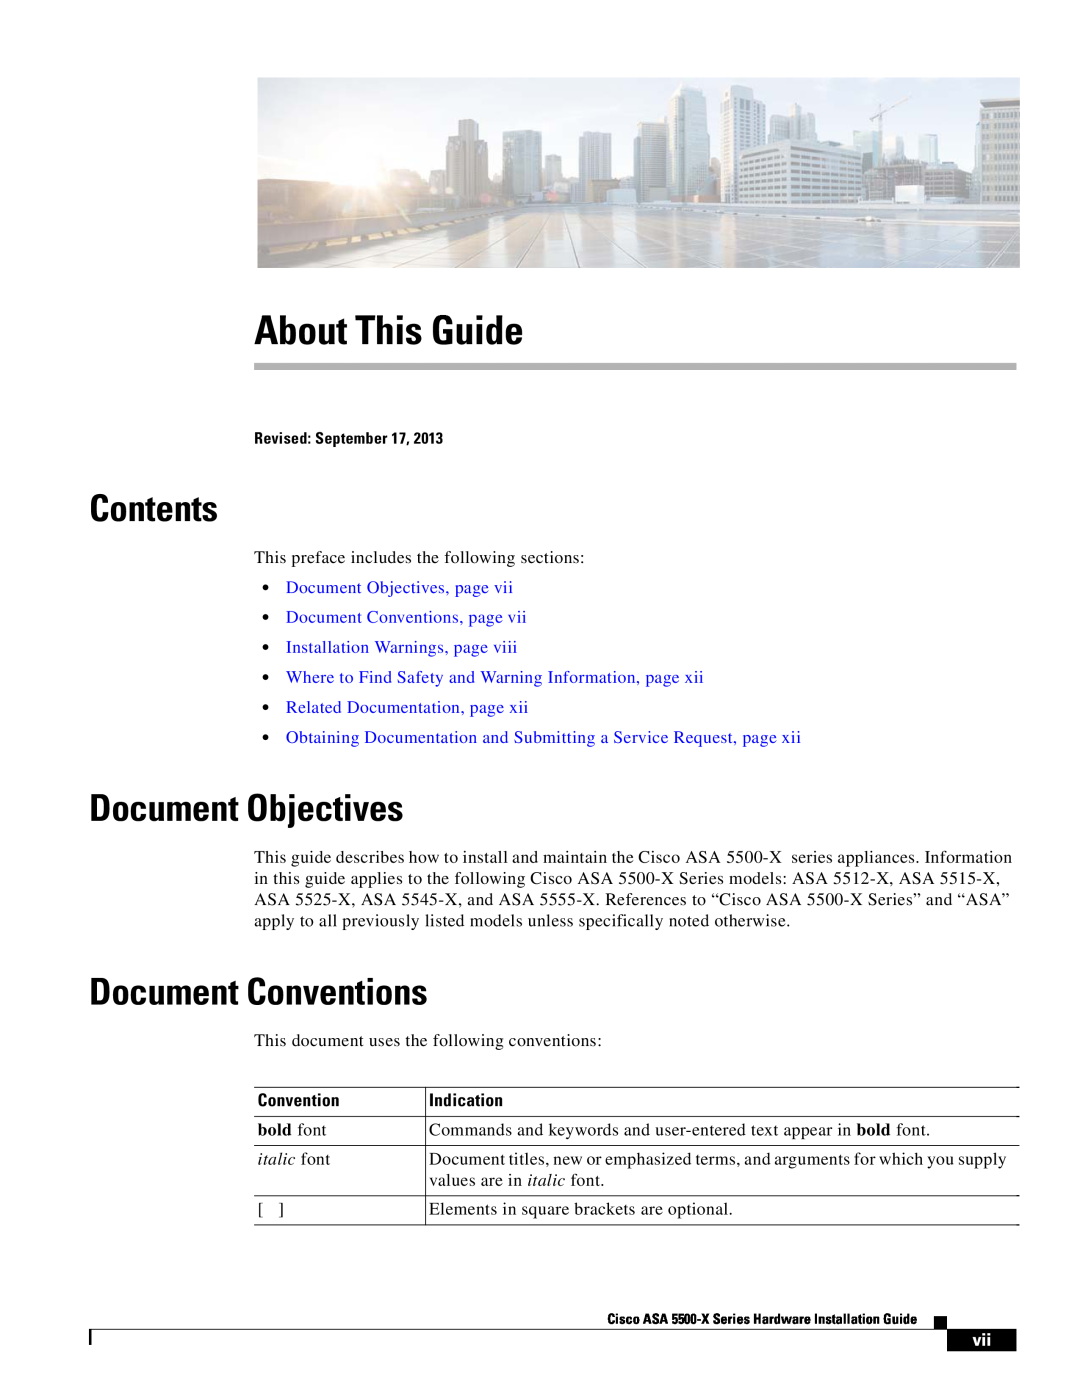 Cisco Systems ASA5525IPSK9 About This Guide, Contents, Document Objectives, Document Conventions, bold font, italic font 